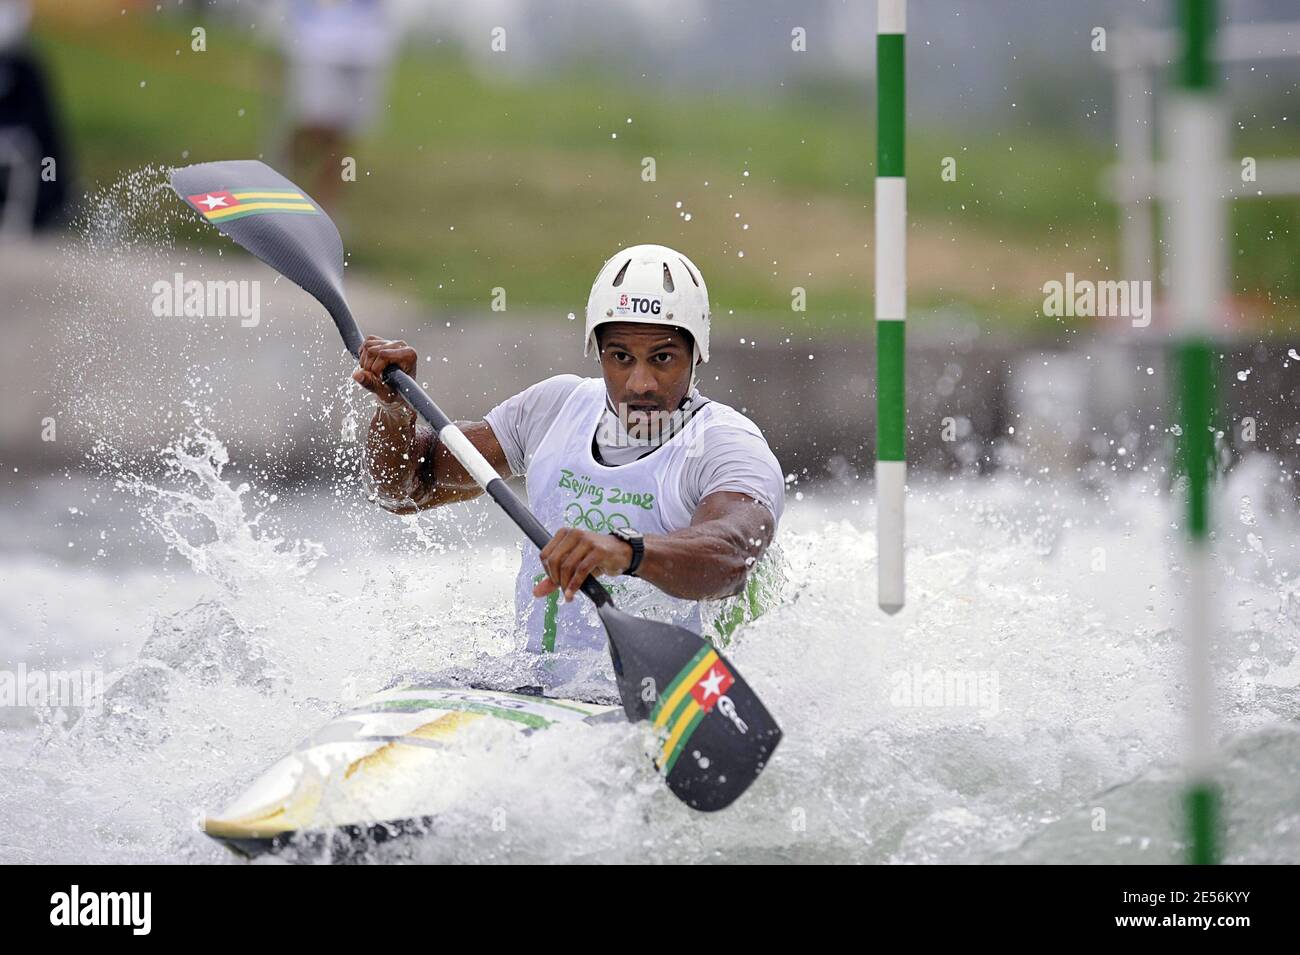 Tonga's Benjamin Boukpeti competes in the Men's canoe/kayak slalom  qualification at the XXIX Olympic Games Day 3 at the Shunyi Olympic Rowing- Canoeing Park in Beijing, China on August 11, 2008. Photo by